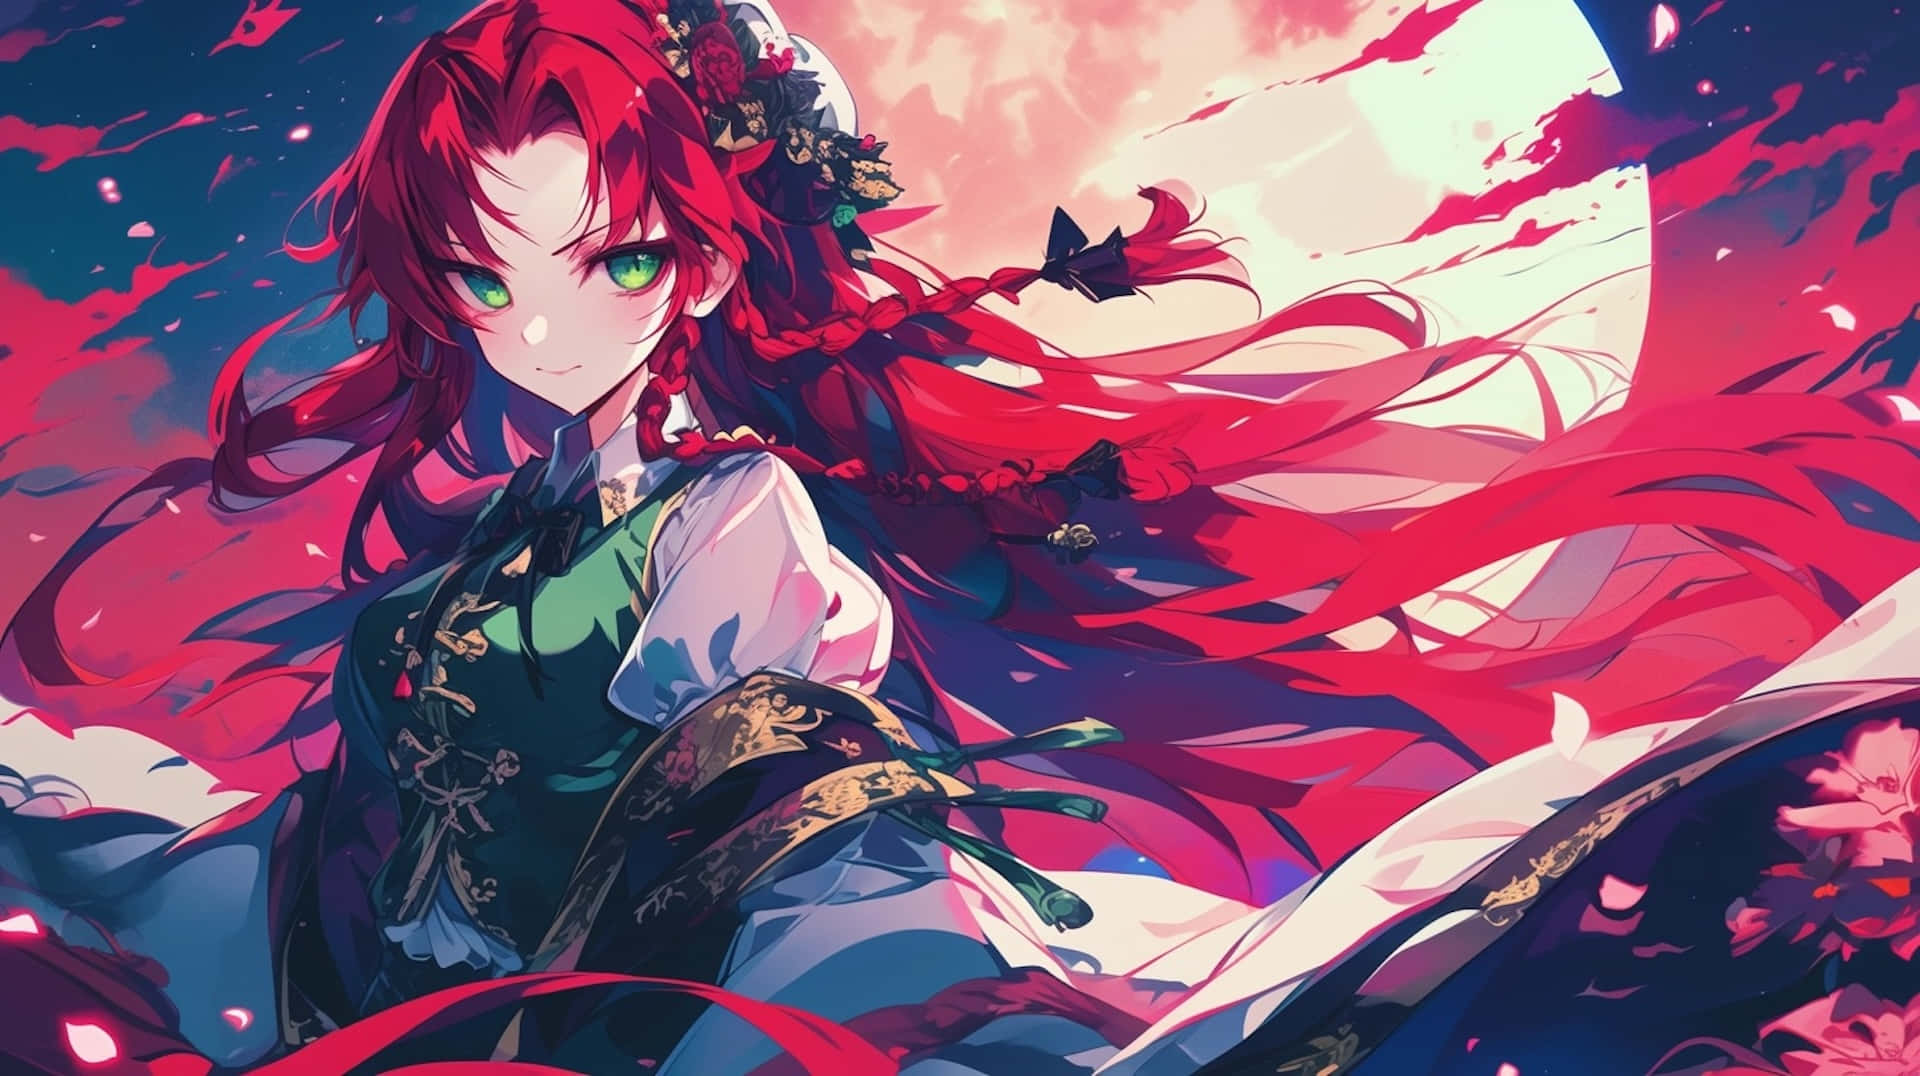 Vibrant Red Haired Anime Character Wallpaper